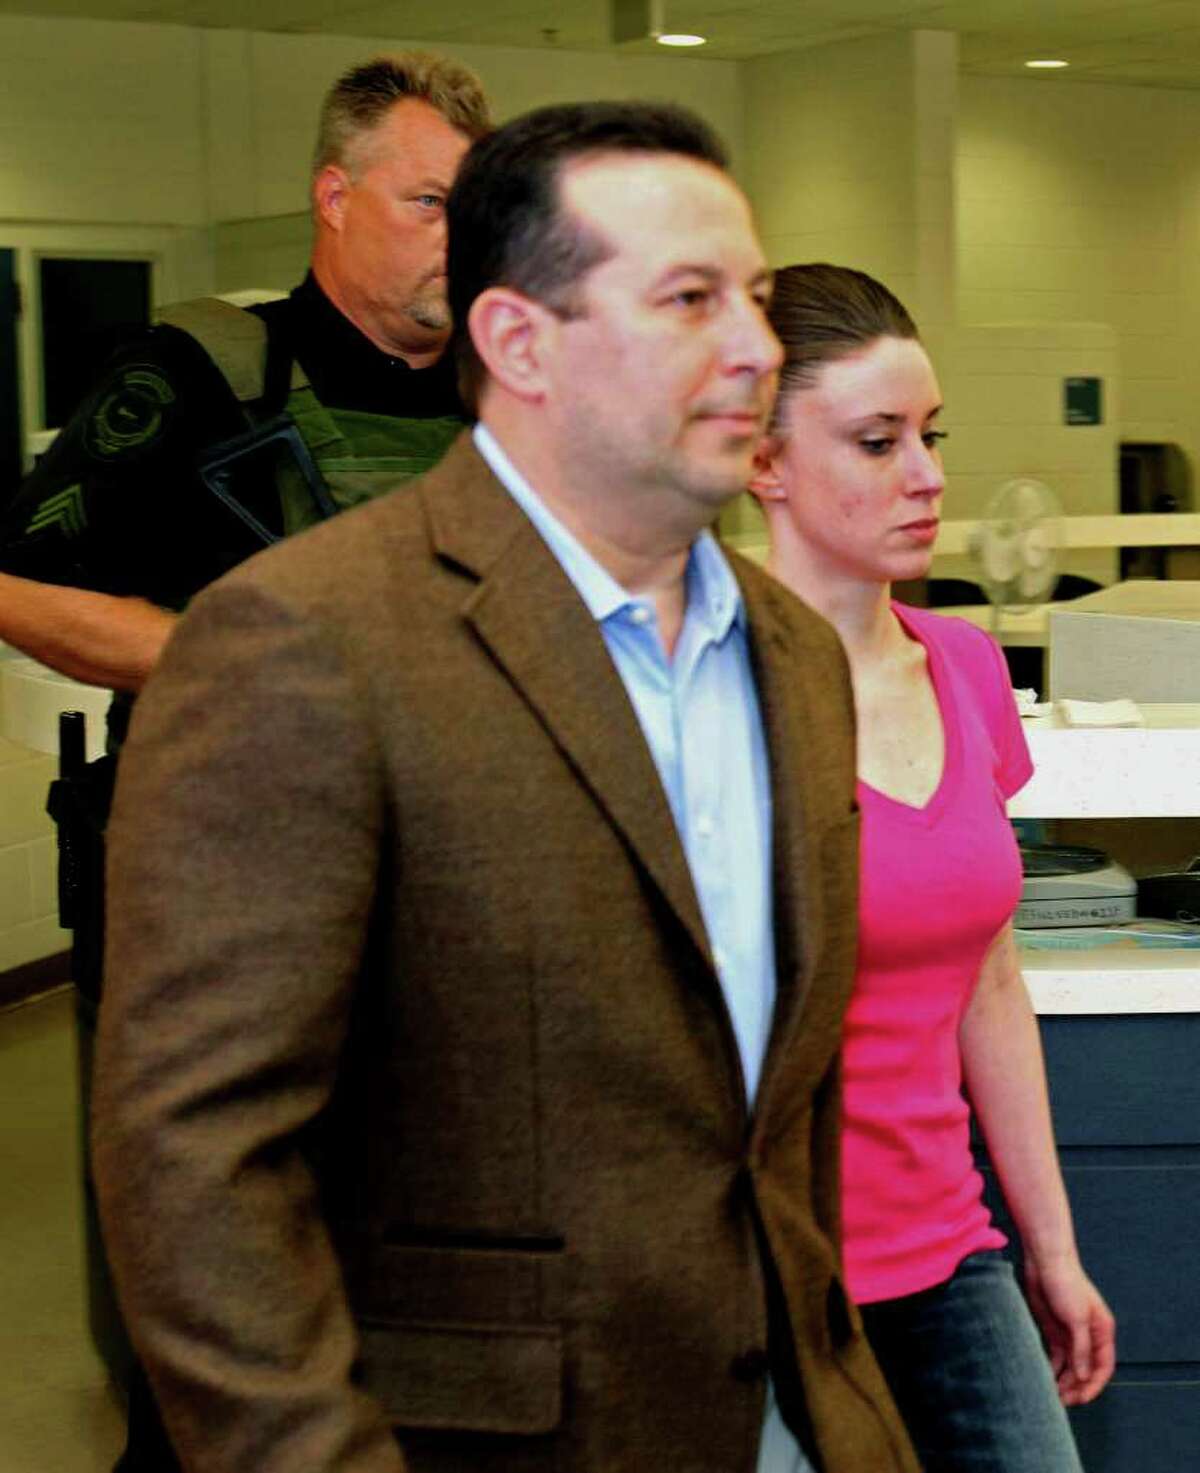 Casey Anthony, front right, walks out of the Orange County Jail with her attorney Jose Baez, left, during her release in Orlando, Fla., Sunday, July 17, 2011. Anthony was acquitted last week of murder in the death of her daughter, Caylee.